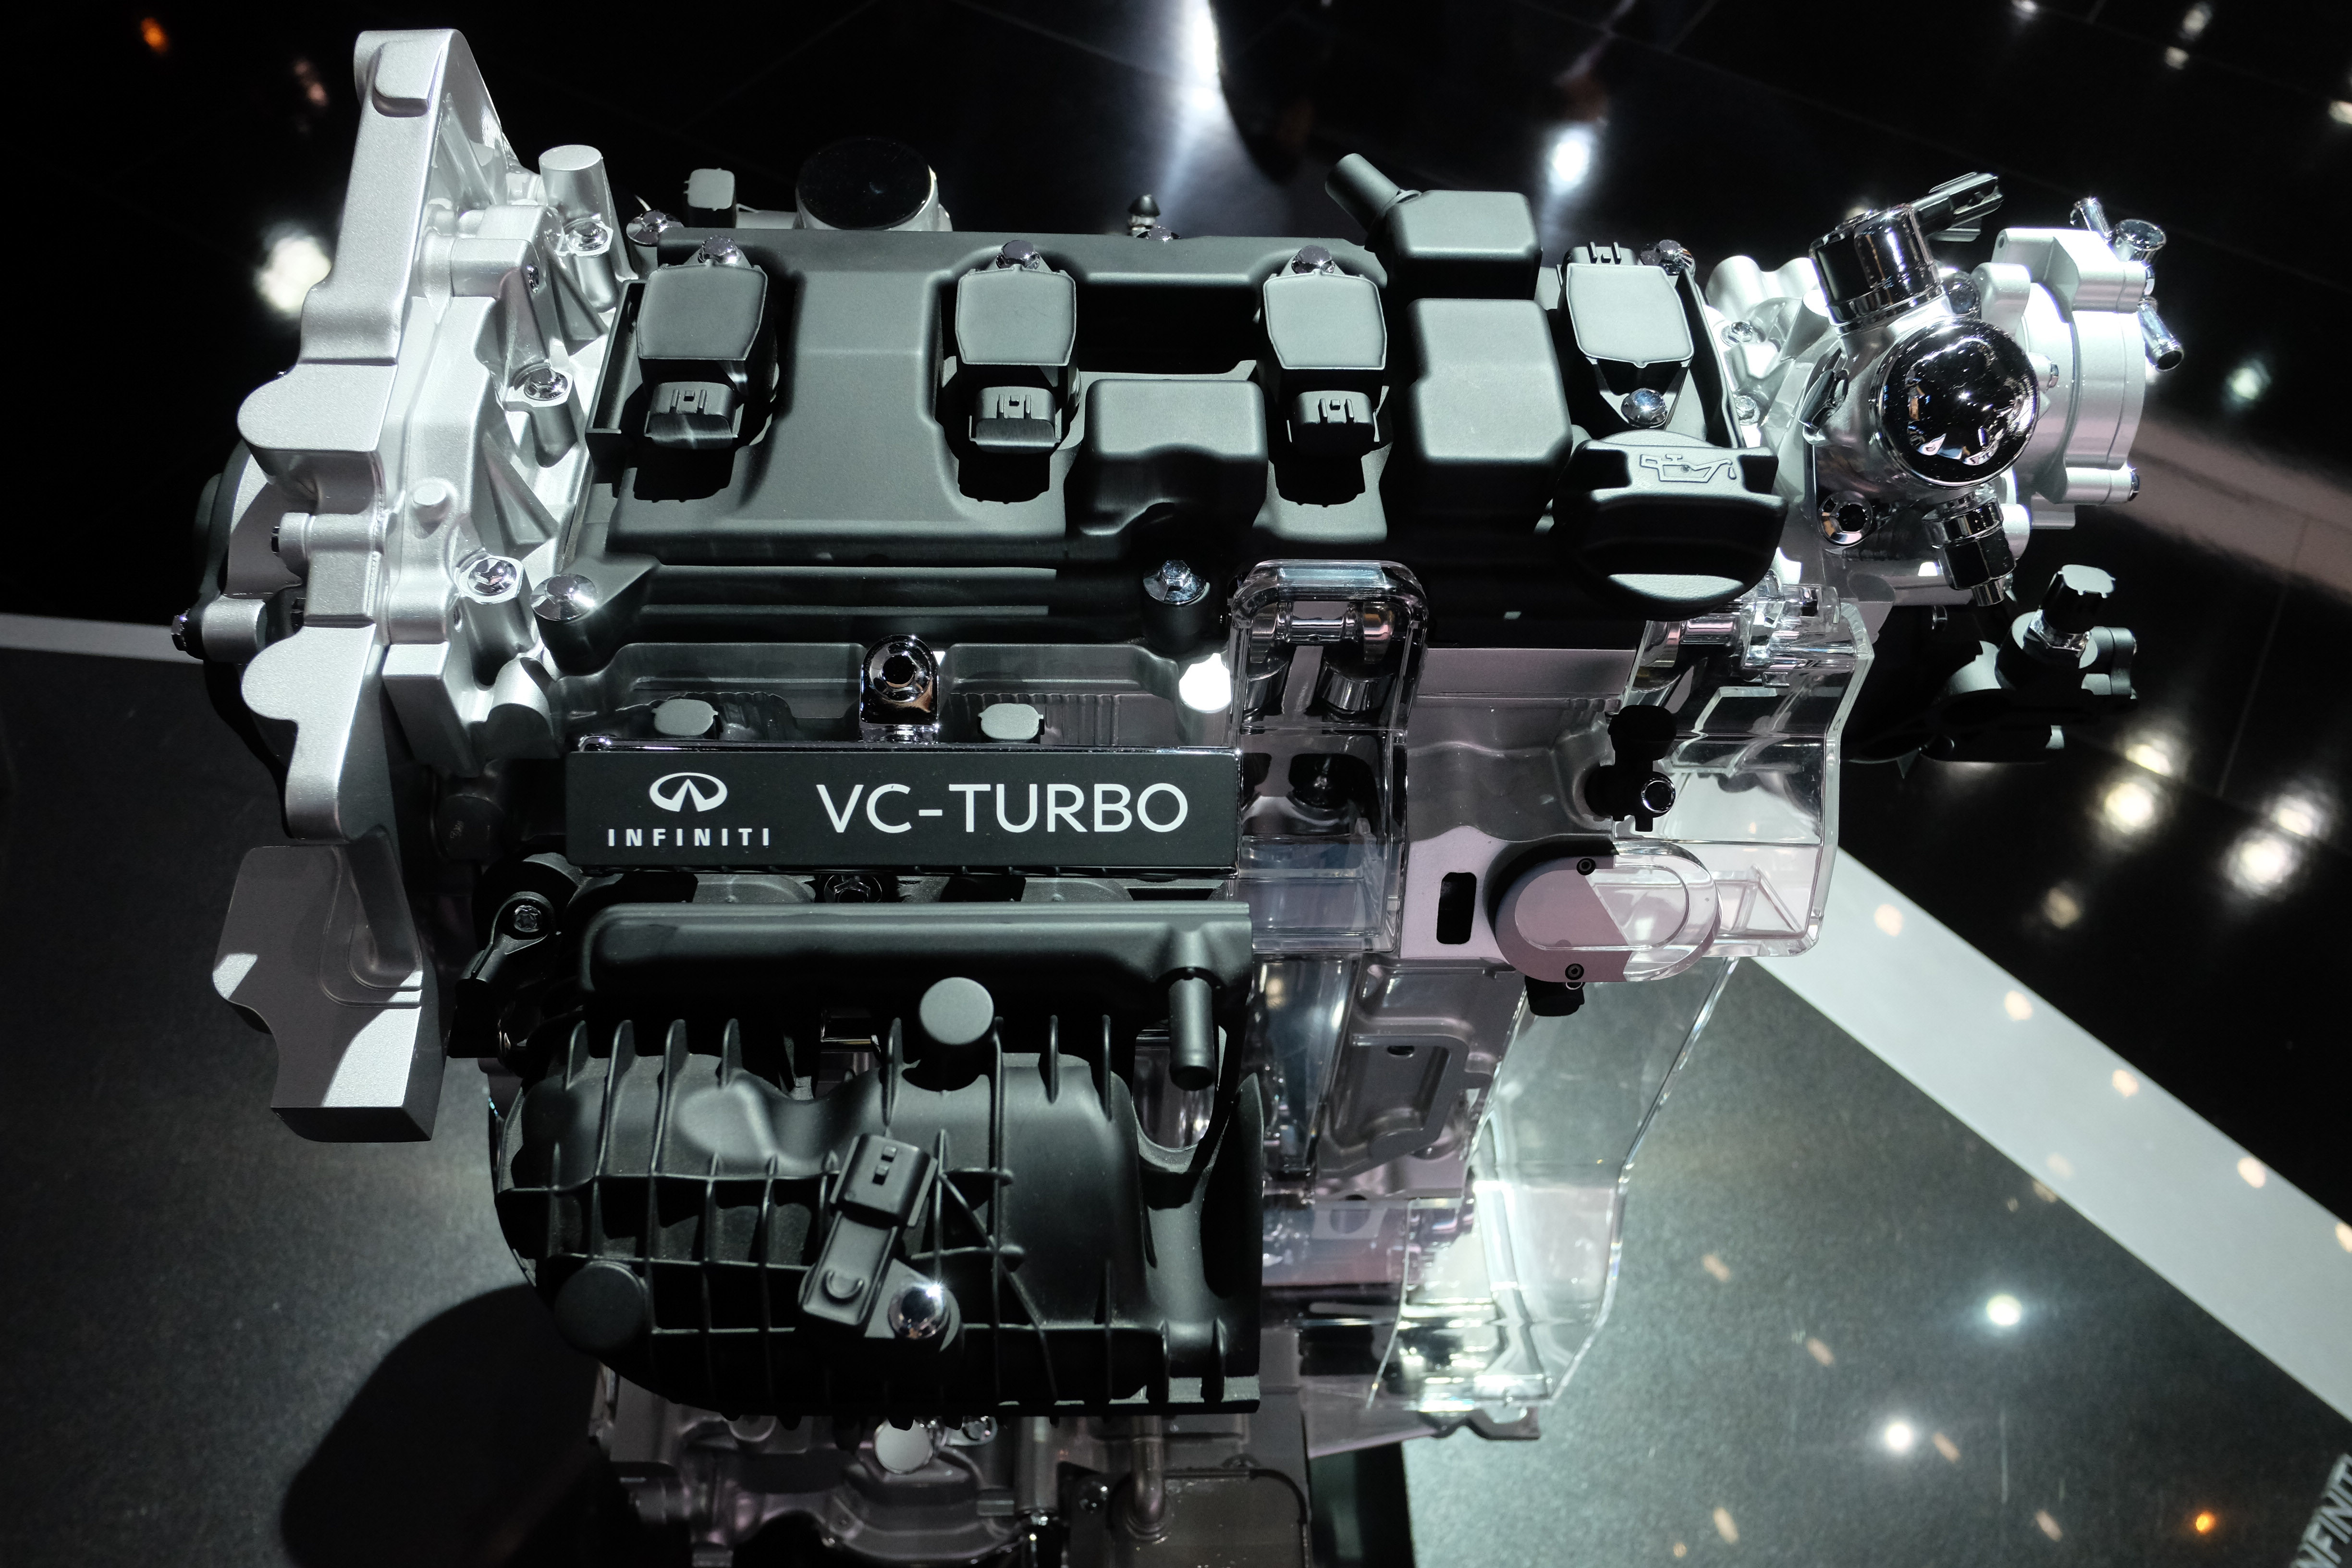 Infiniti Features New VC Turbo Engine at L.A. Auto Show